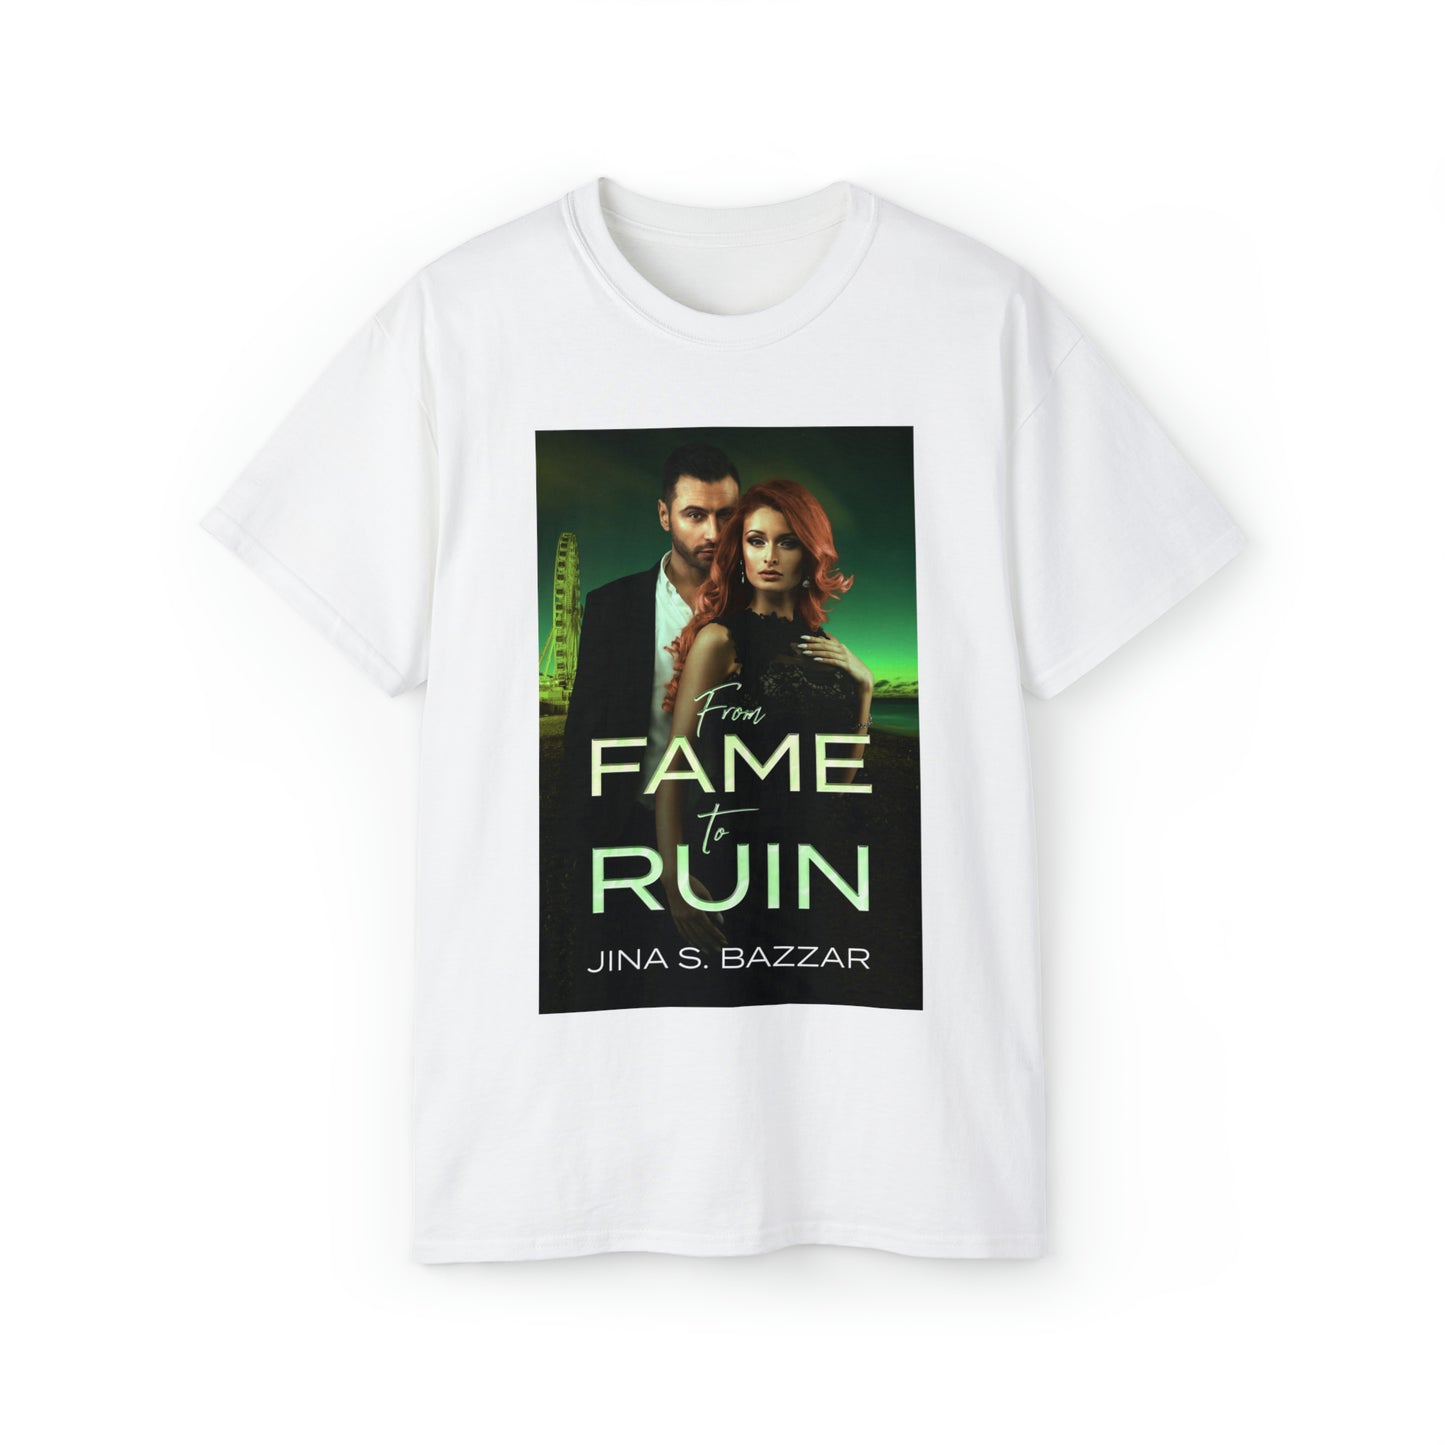 From Fame To Ruin - Unisex T-Shirt